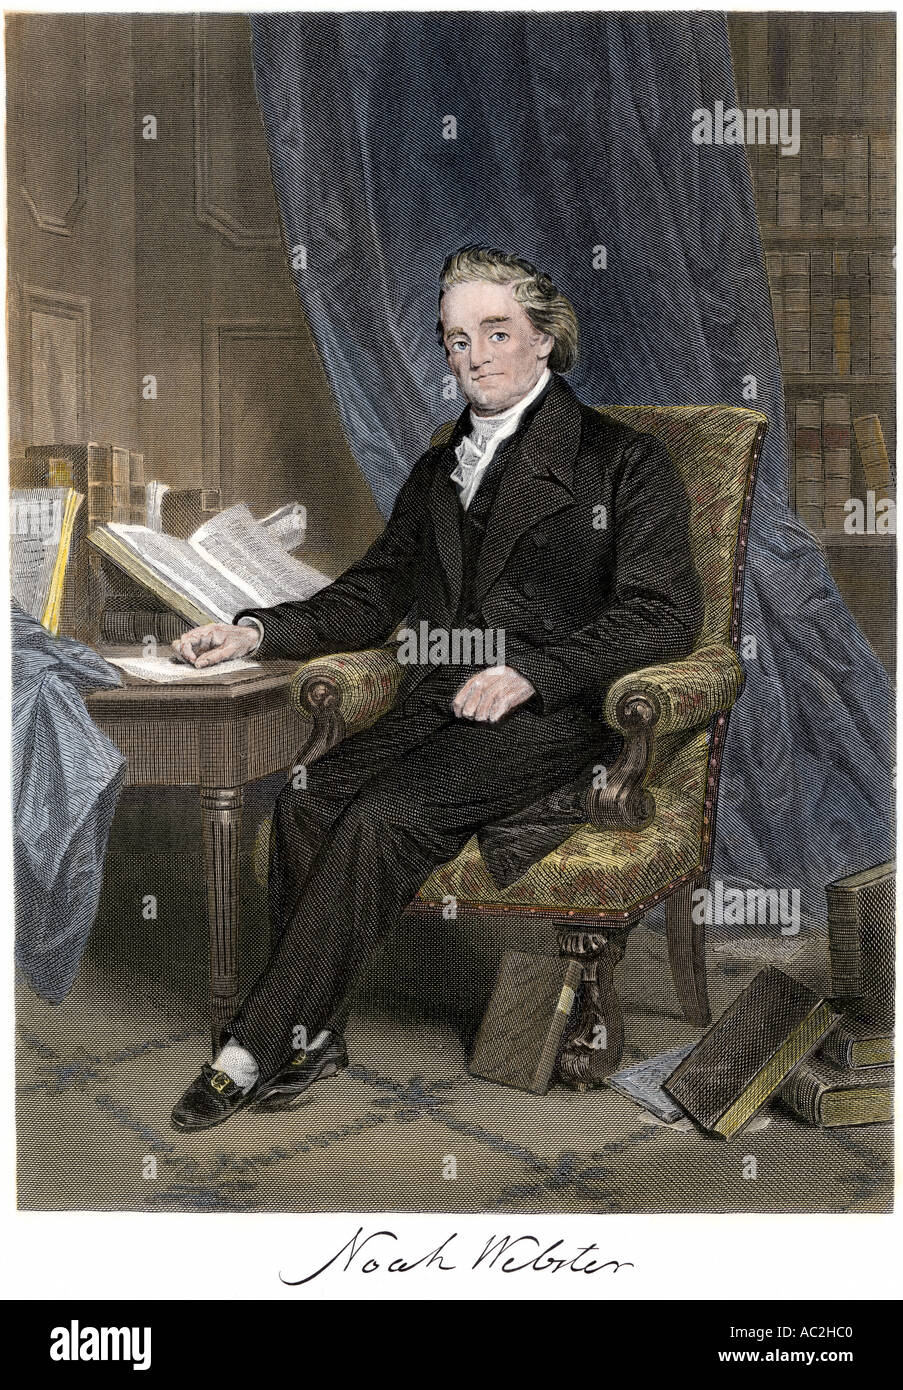 Noah Webster American lexicographer surrounded by books. Hand-colored steel engraving Stock Photo